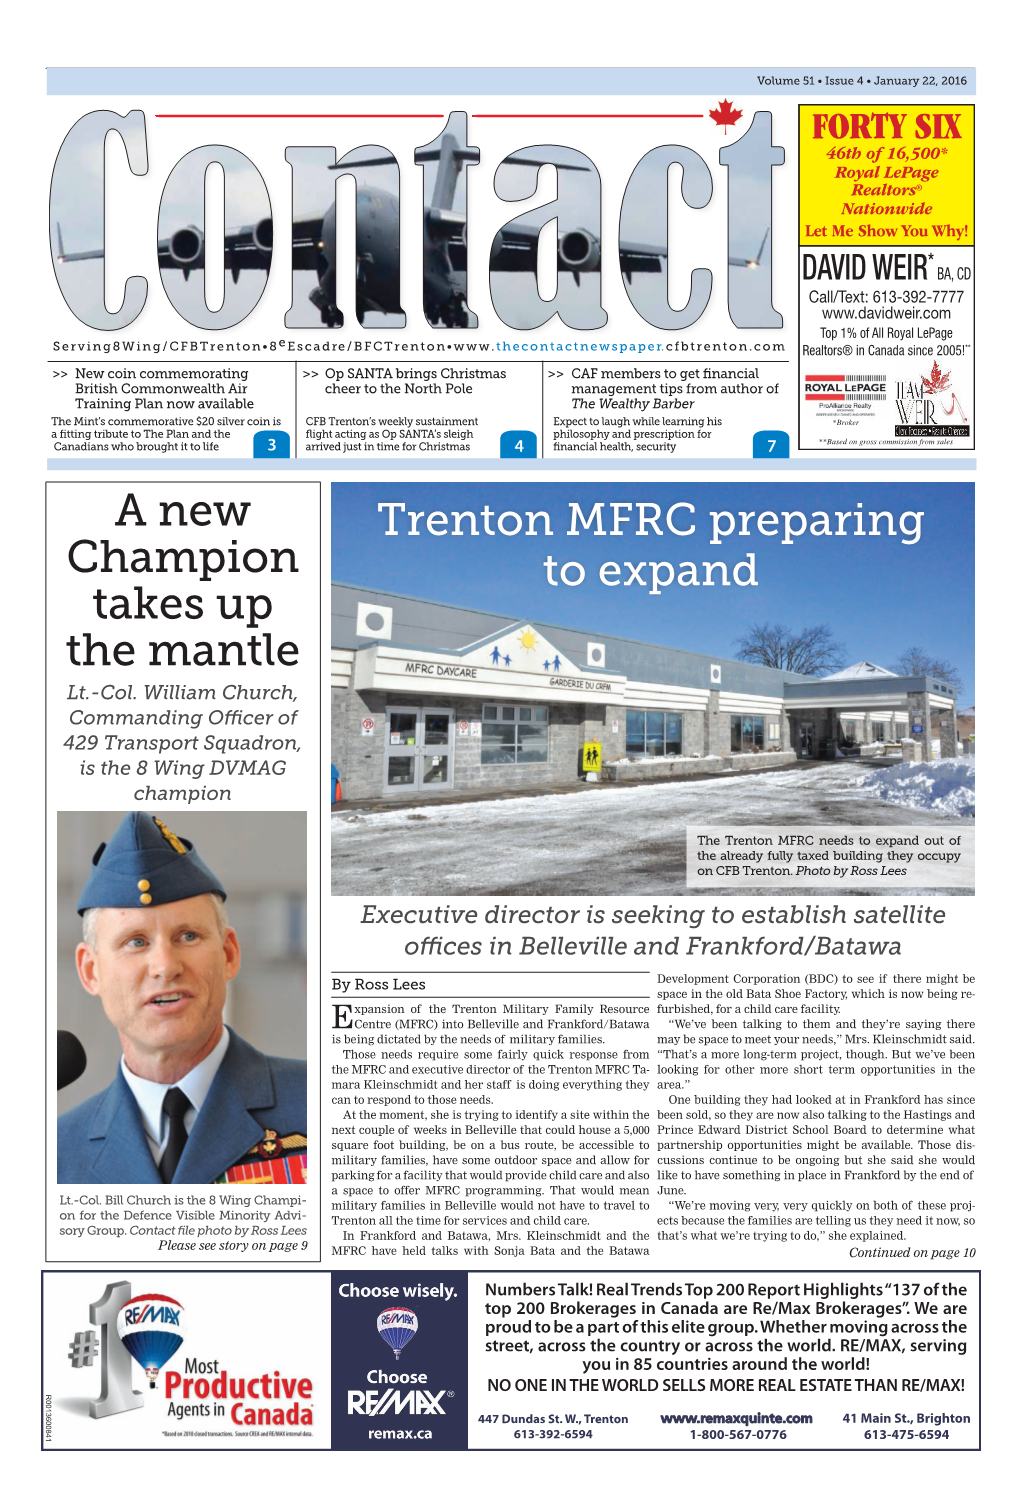 A New Champion Takes up the Mantle Trenton MFRC Preparing to Expand